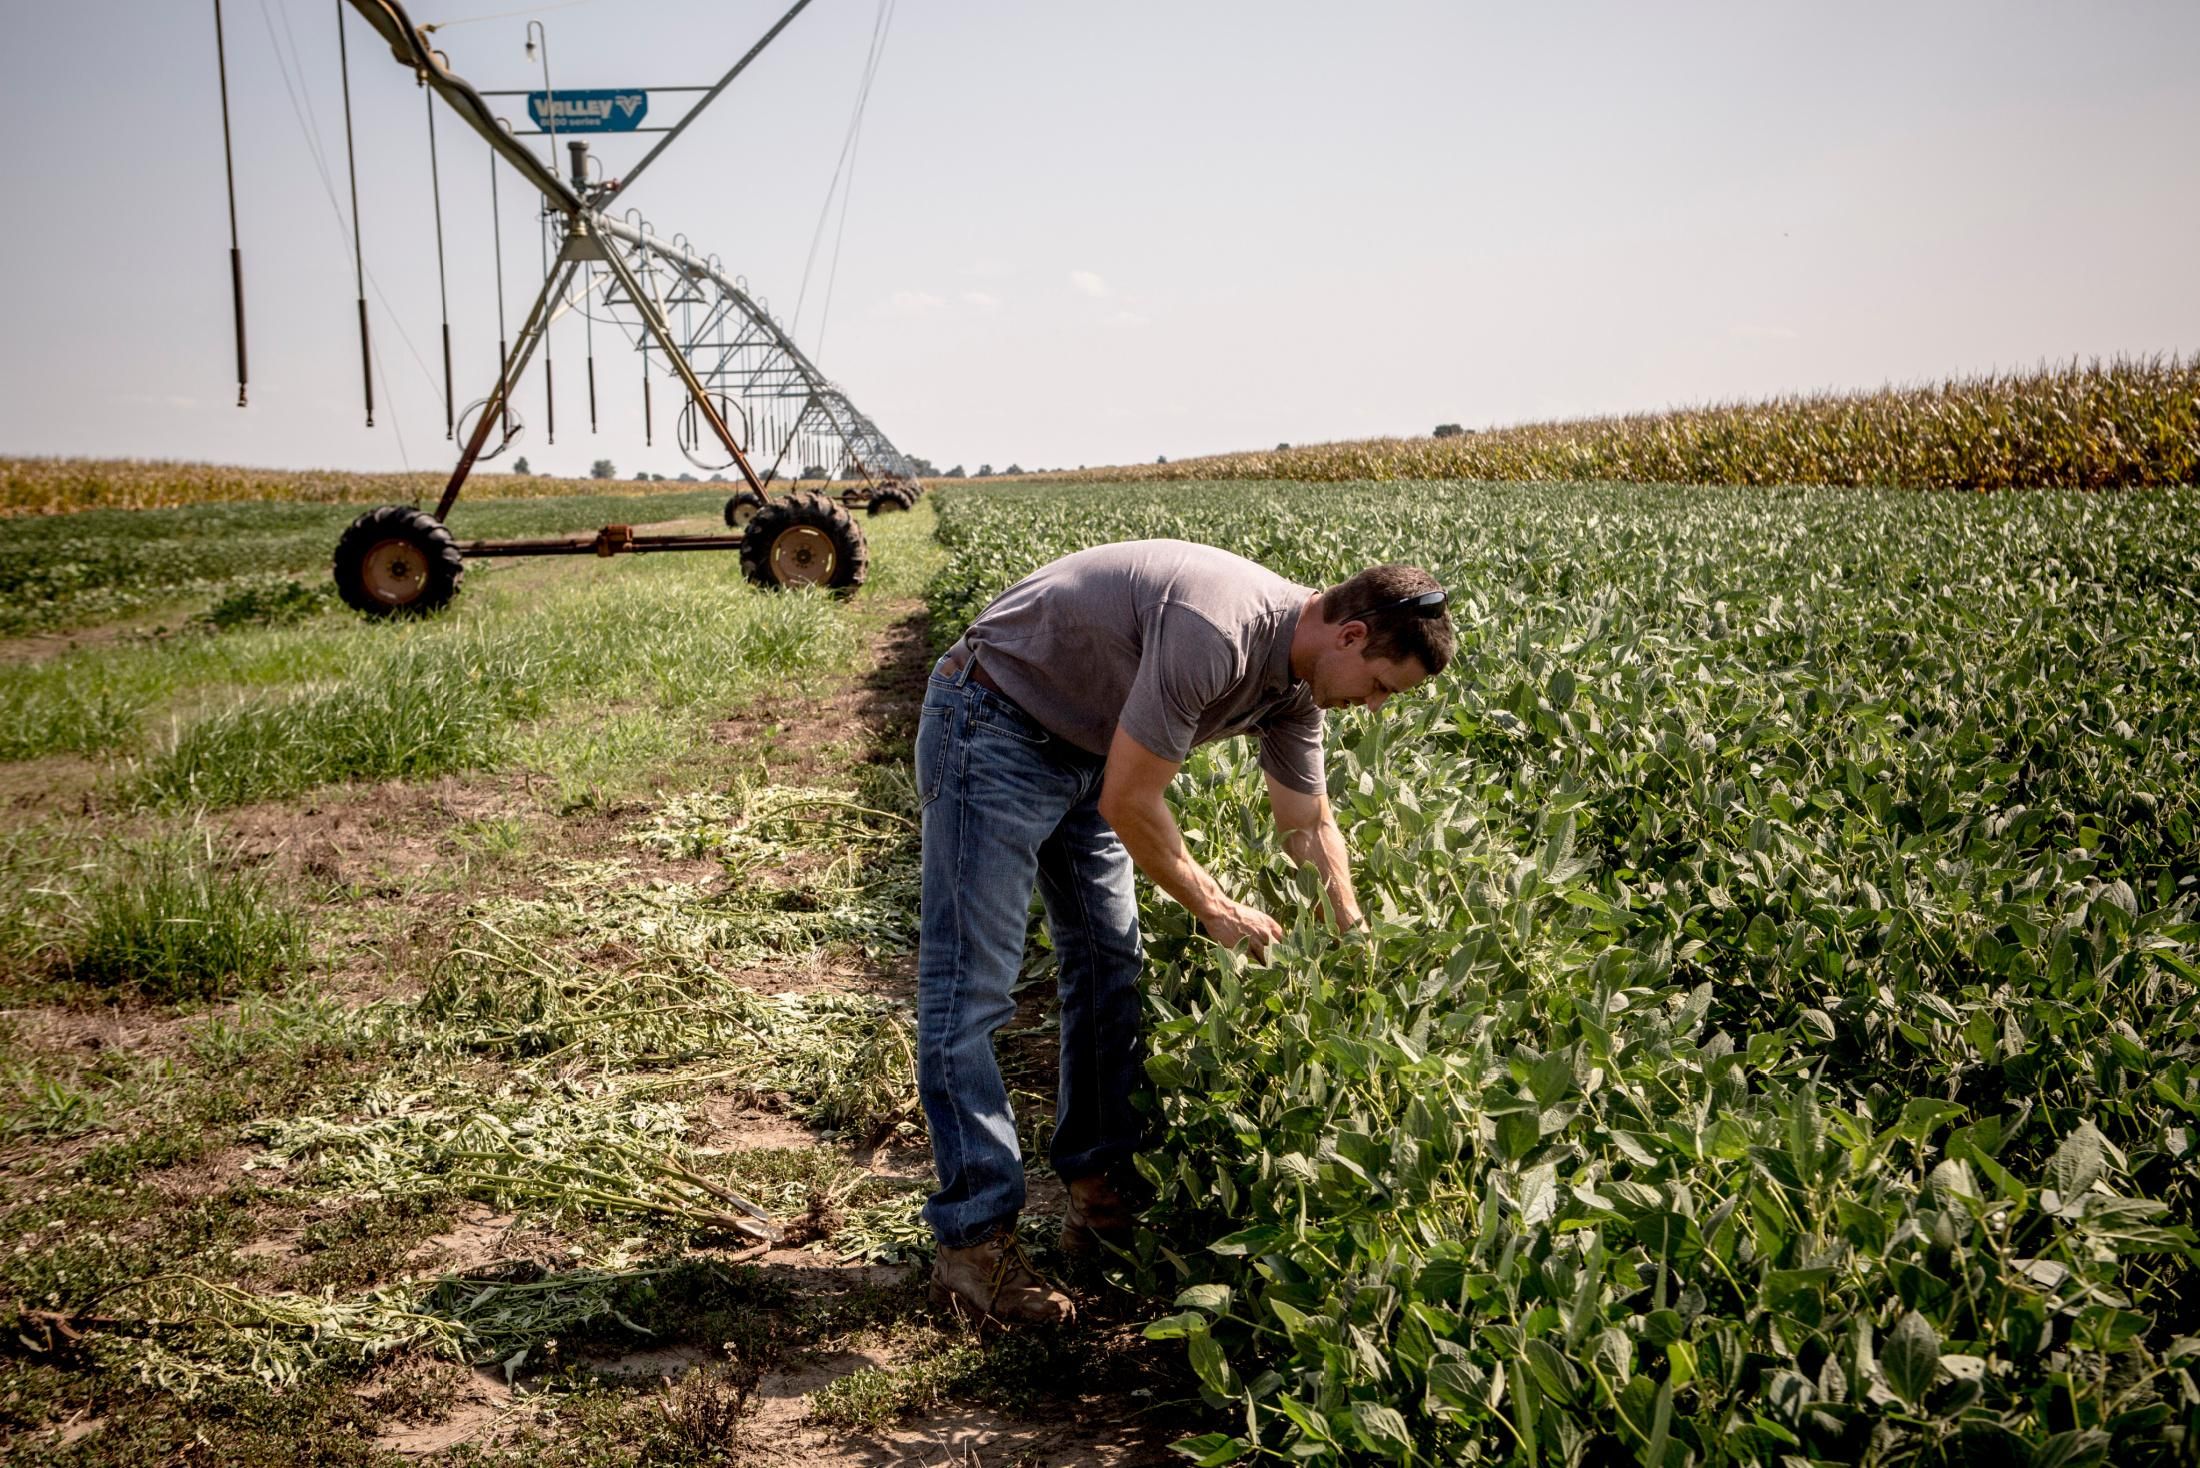 Brad Rose looks at rows of soybean plants that show signs of having been affected by dicamba use on August 9, 2017. (Photo: The Washington Post via Getty Images)